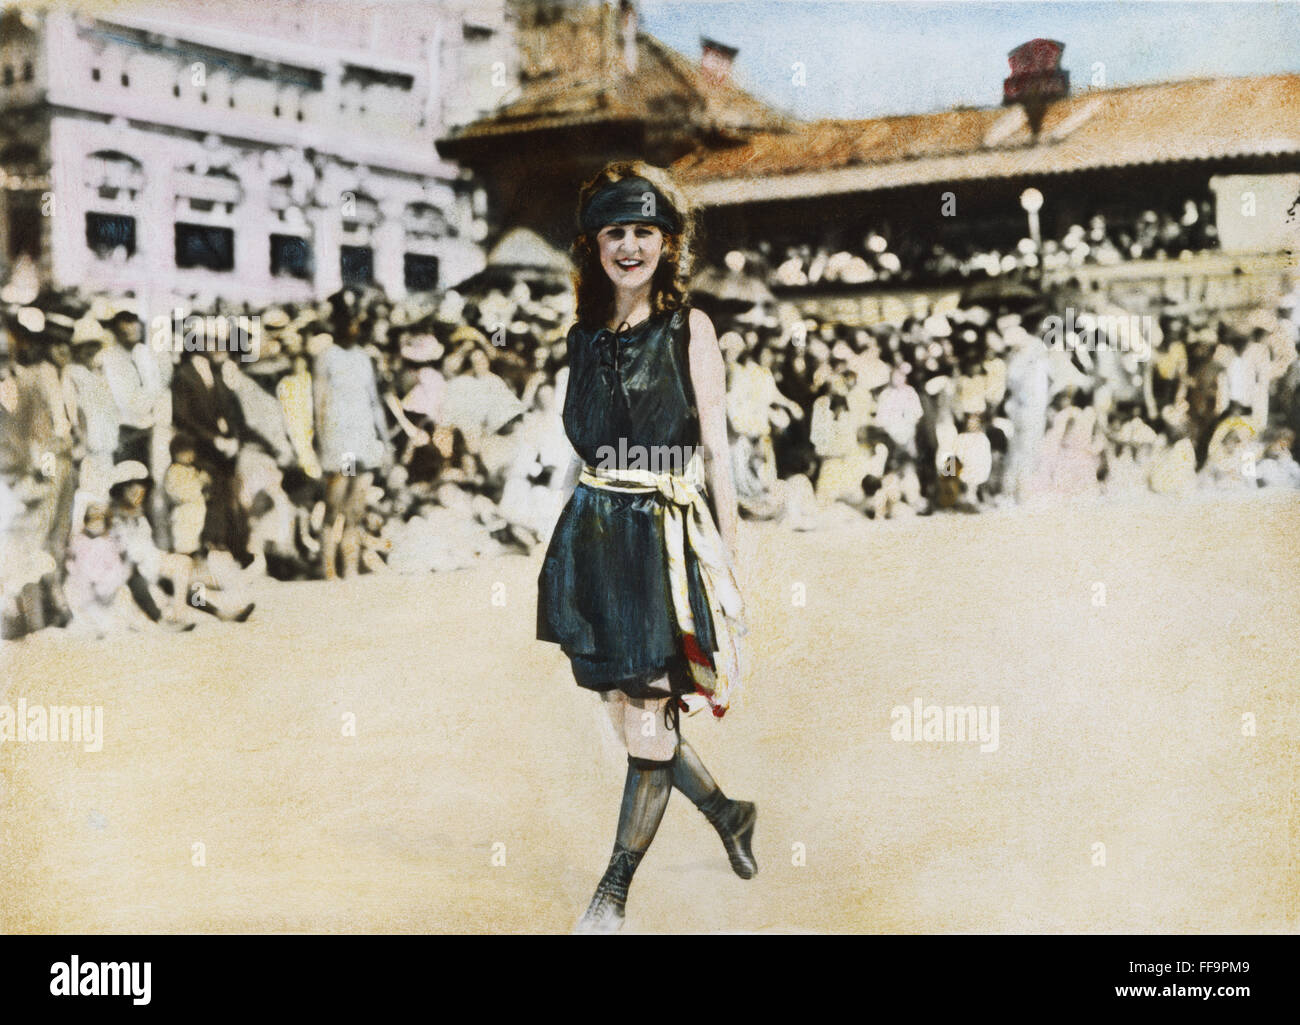 MARGARET GORMAN, 1921. /nMargaret Gorman of Washington, D.C., the first Miss America, at Atlantic City, New Jersey: oil over a photograph, 1921. Stock Photo